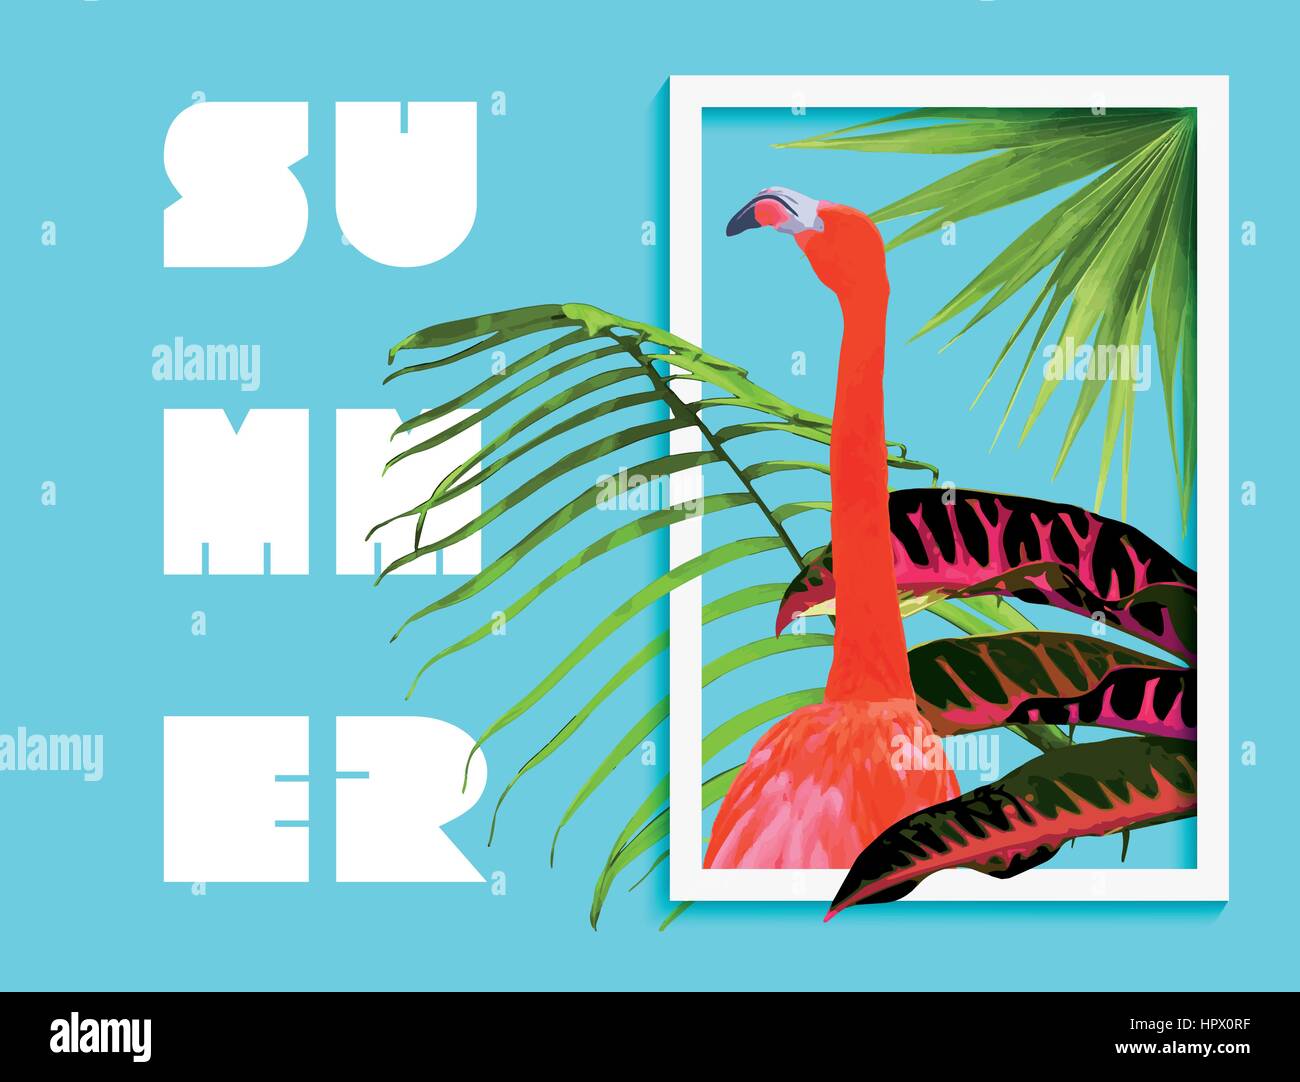 Tropical summer art with jungle nature decoration and flamingo bird inside frame. Palm tree leaves background, exotic plants in modern graphic fashion Stock Vector